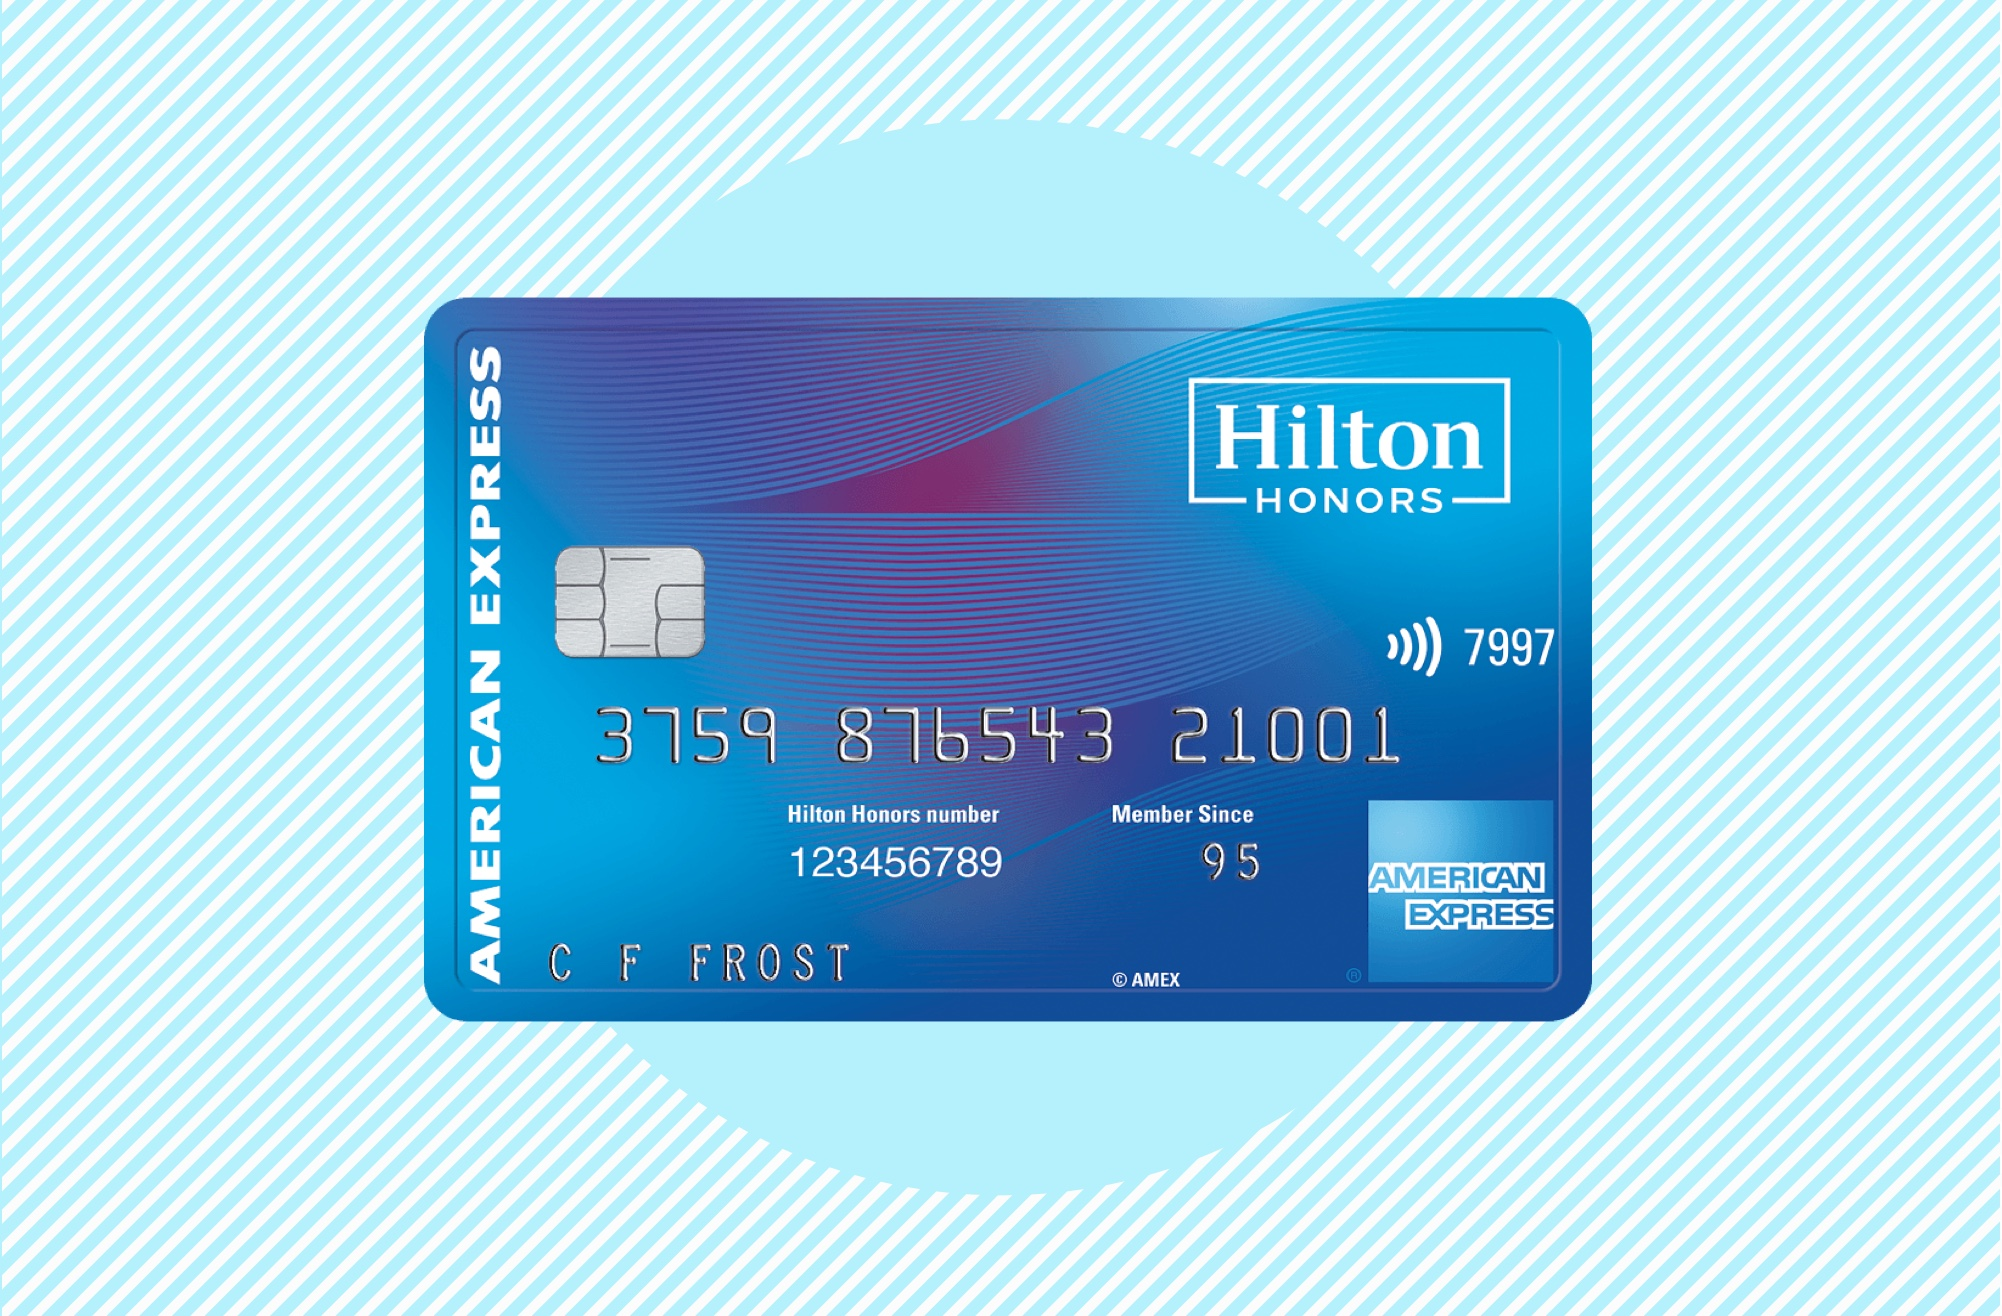 Learn how to apply for the Hilton Honors American Express Card